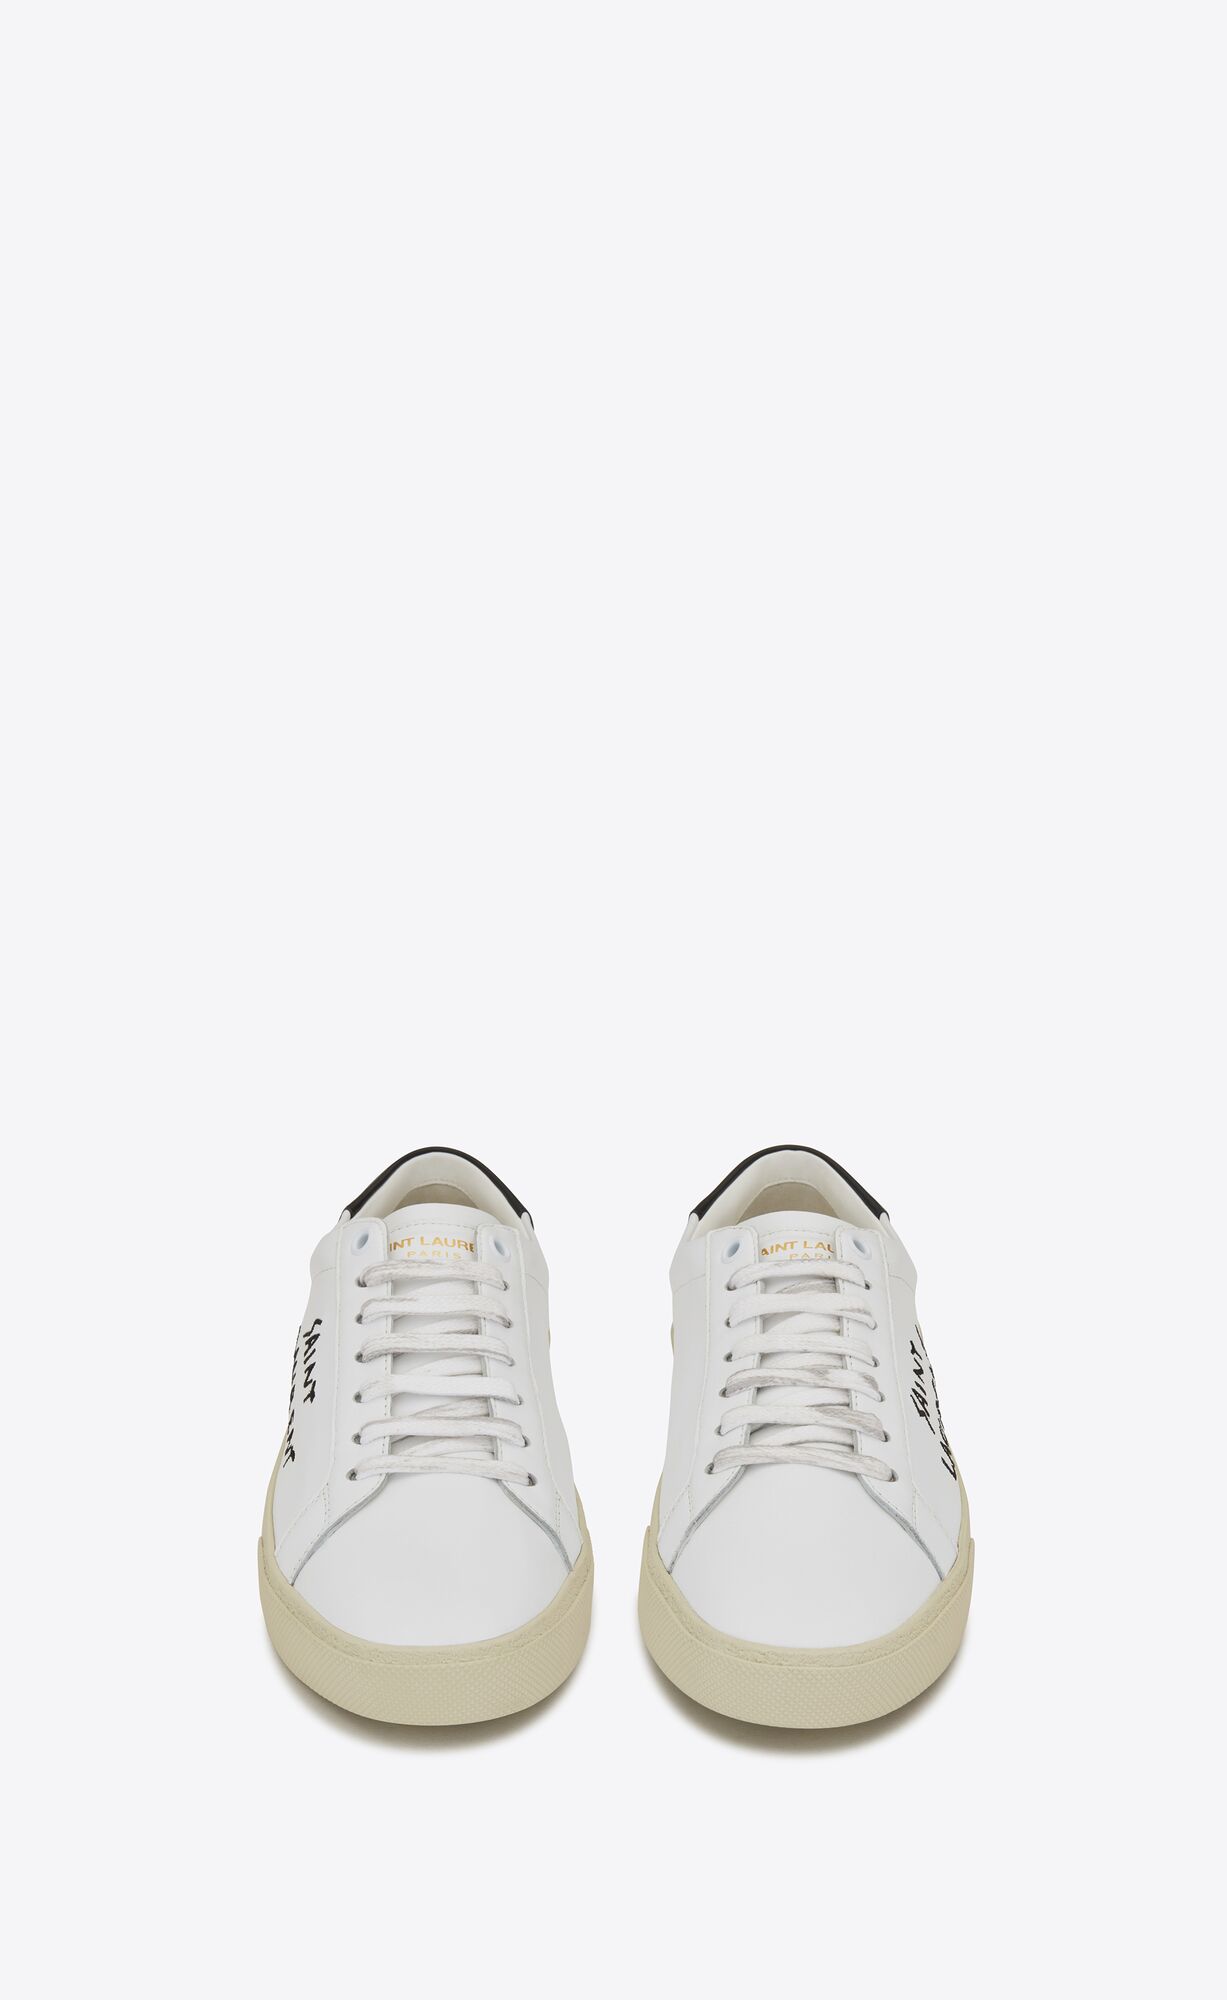 Court classic sl/06 embroidered sneakers in canvas and leather | Saint ...